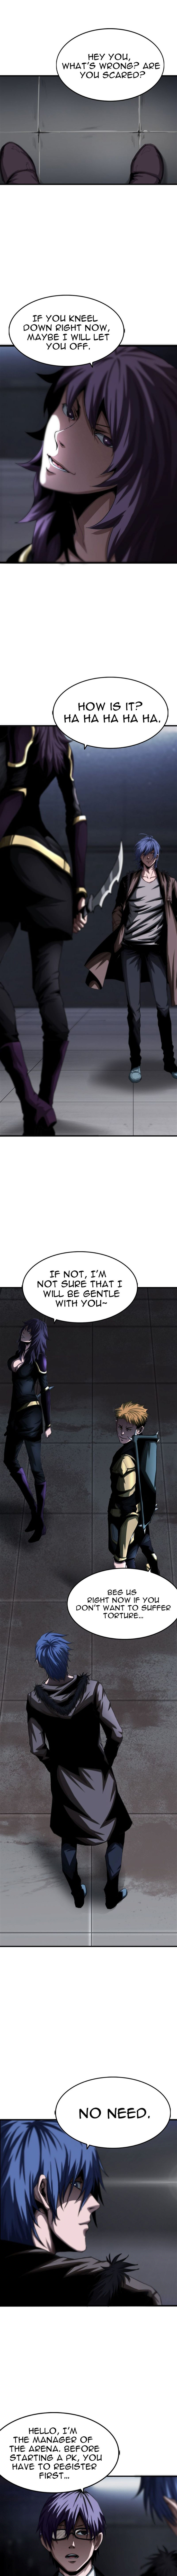 The Blade Of Evolution-Walking Alone In The Dungeon Chapter 11 page 4